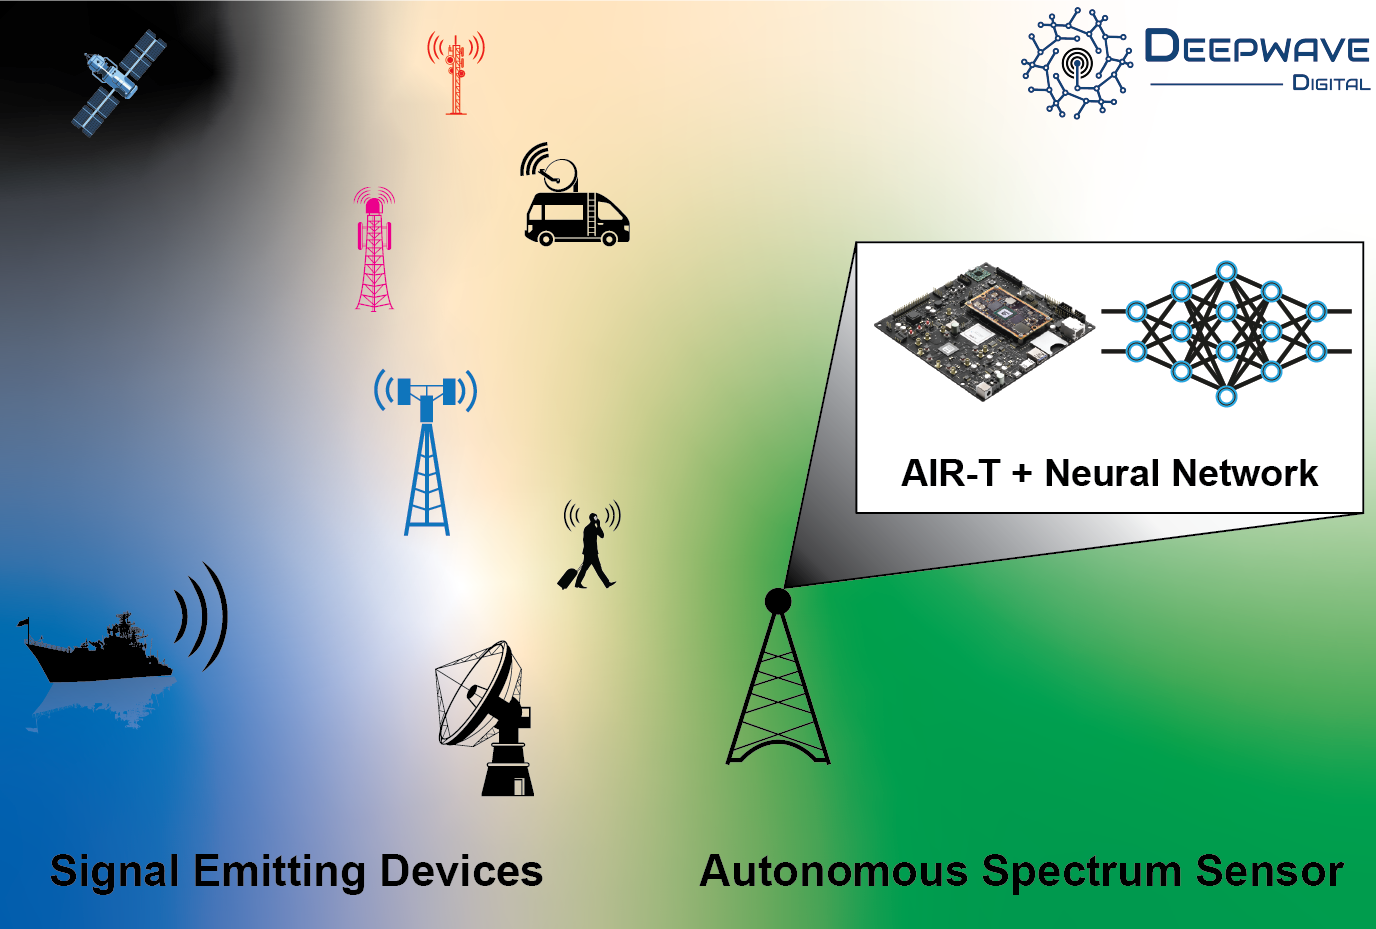 Applying deep learning to spectrum sensing with the AIR-T